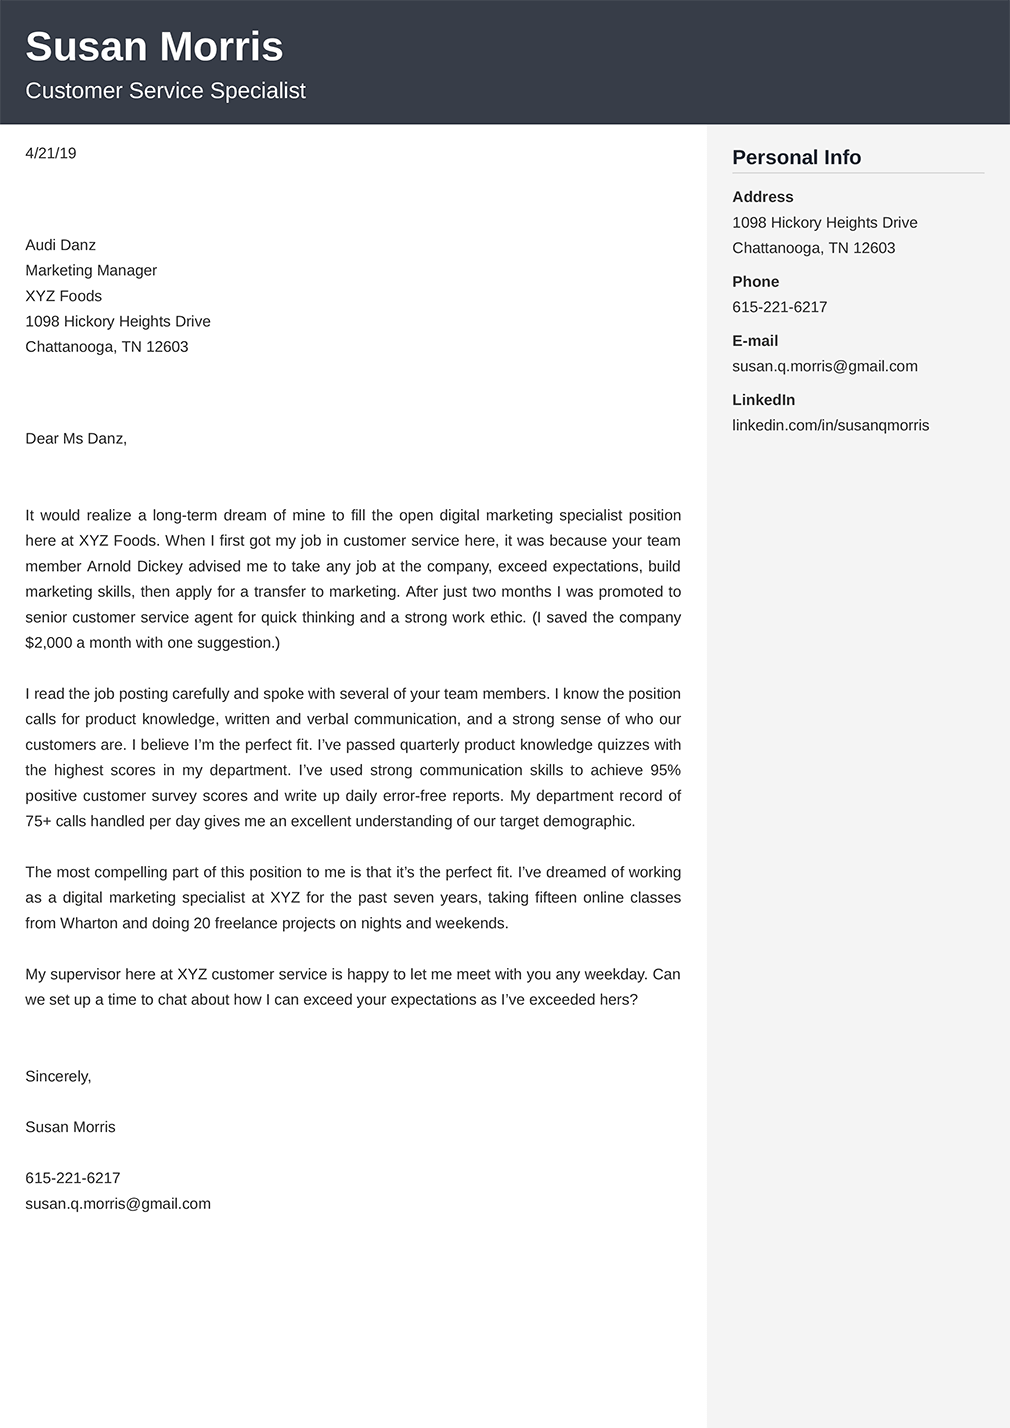 Cover Letter Body Examples from cdn-images.zety.com